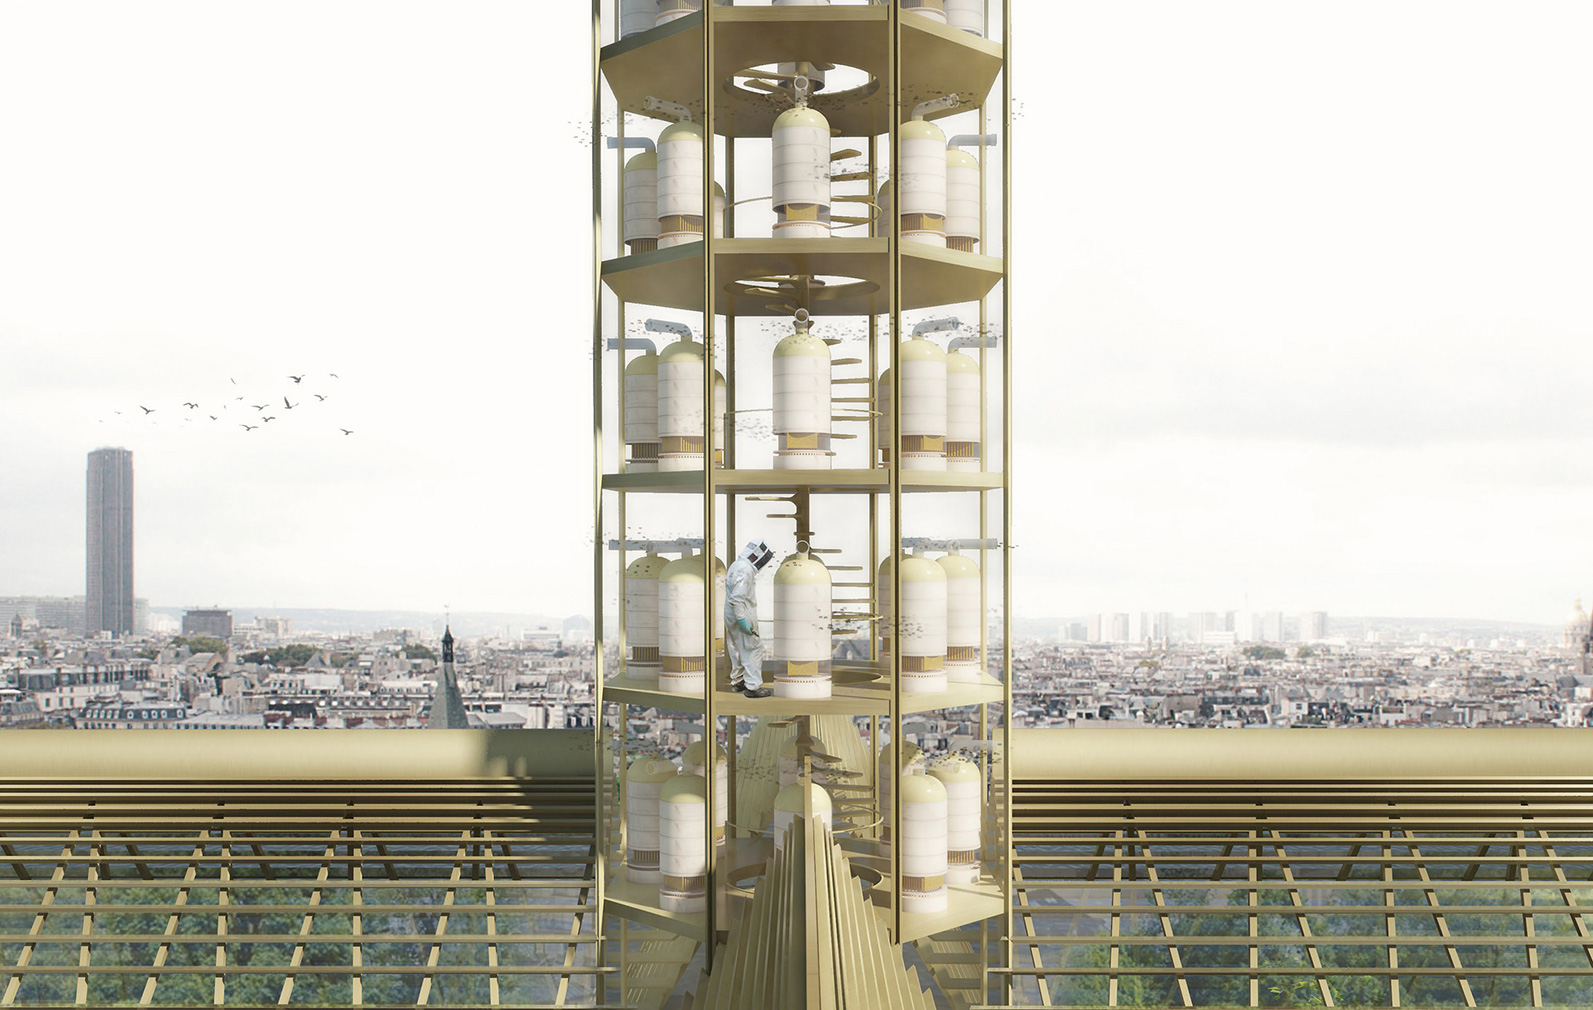 Could Notre-Dame’s roof be rebuilt as a giant greenhouse? Studio NAB imagines a new spire as a vertical bee hive